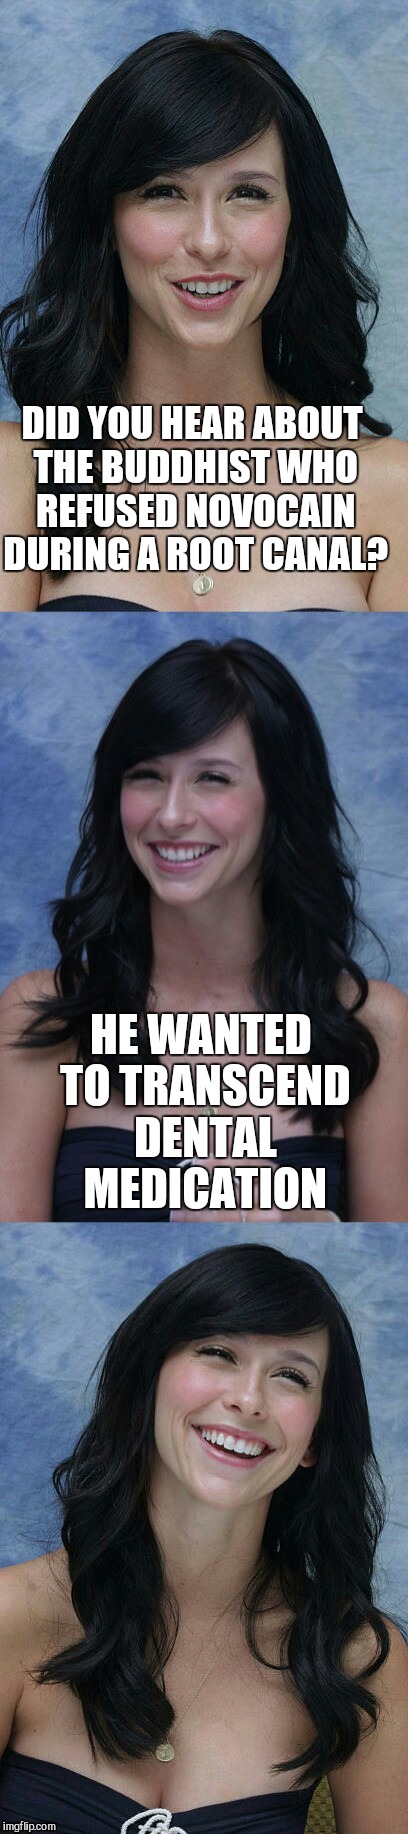 Jennifer Love Hewitt bad puns template | DID YOU HEAR ABOUT THE BUDDHIST WHO REFUSED NOVOCAIN DURING A ROOT CANAL? HE WANTED TO TRANSCEND DENTAL MEDICATION | image tagged in jennifer love hewitt bad puns template,jennifer love hewitt,jbmemegeek,bad puns,buddhism | made w/ Imgflip meme maker